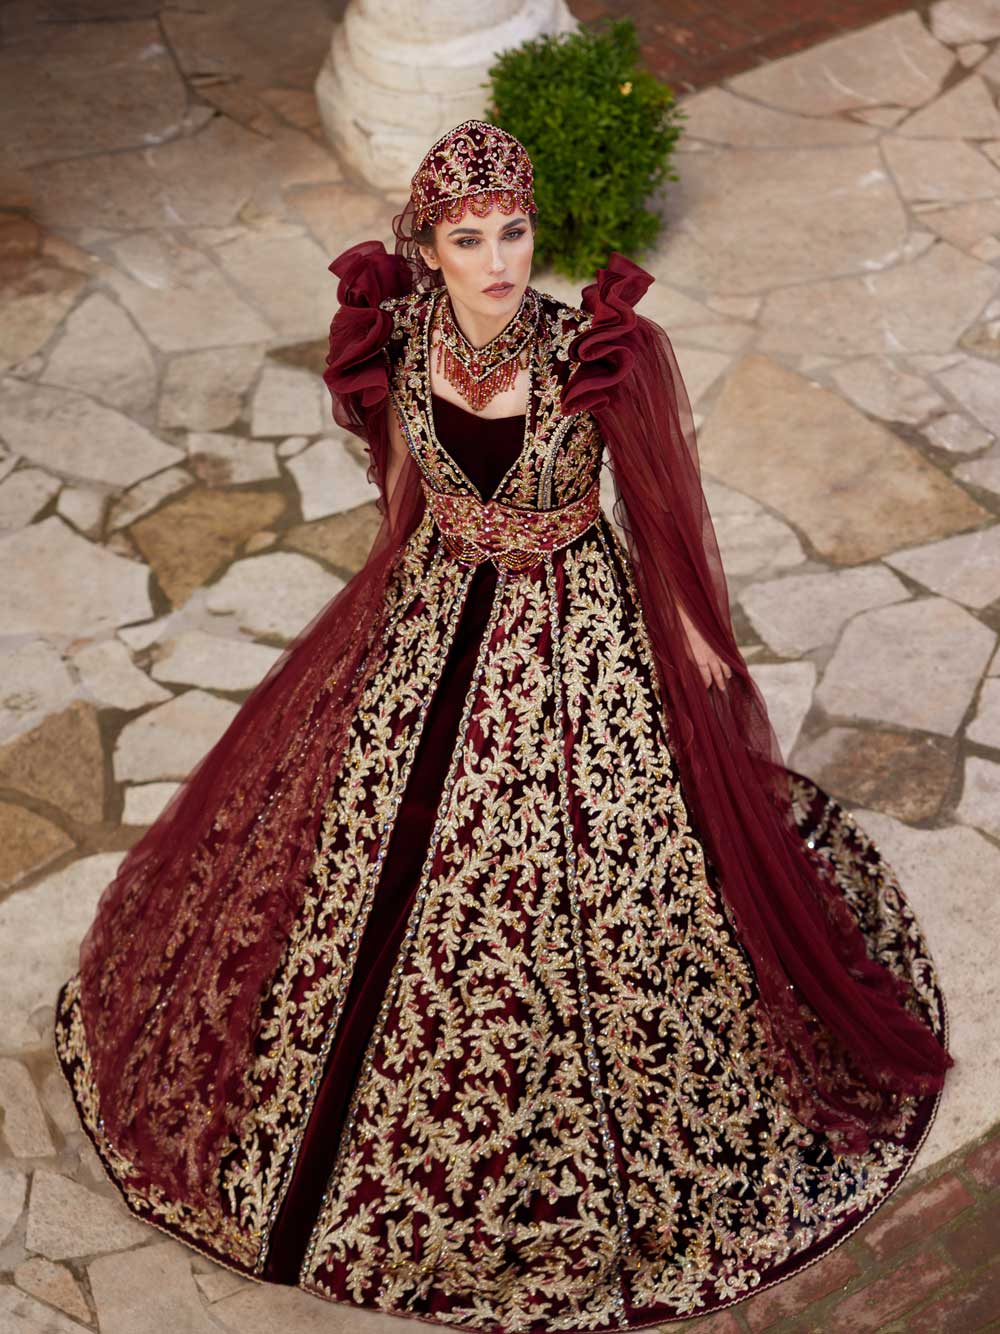 Maroon Velvet Fully Sequined Gold Lace Sweetheart Turkish Henna Kaftan Gown 543_1310 (4)